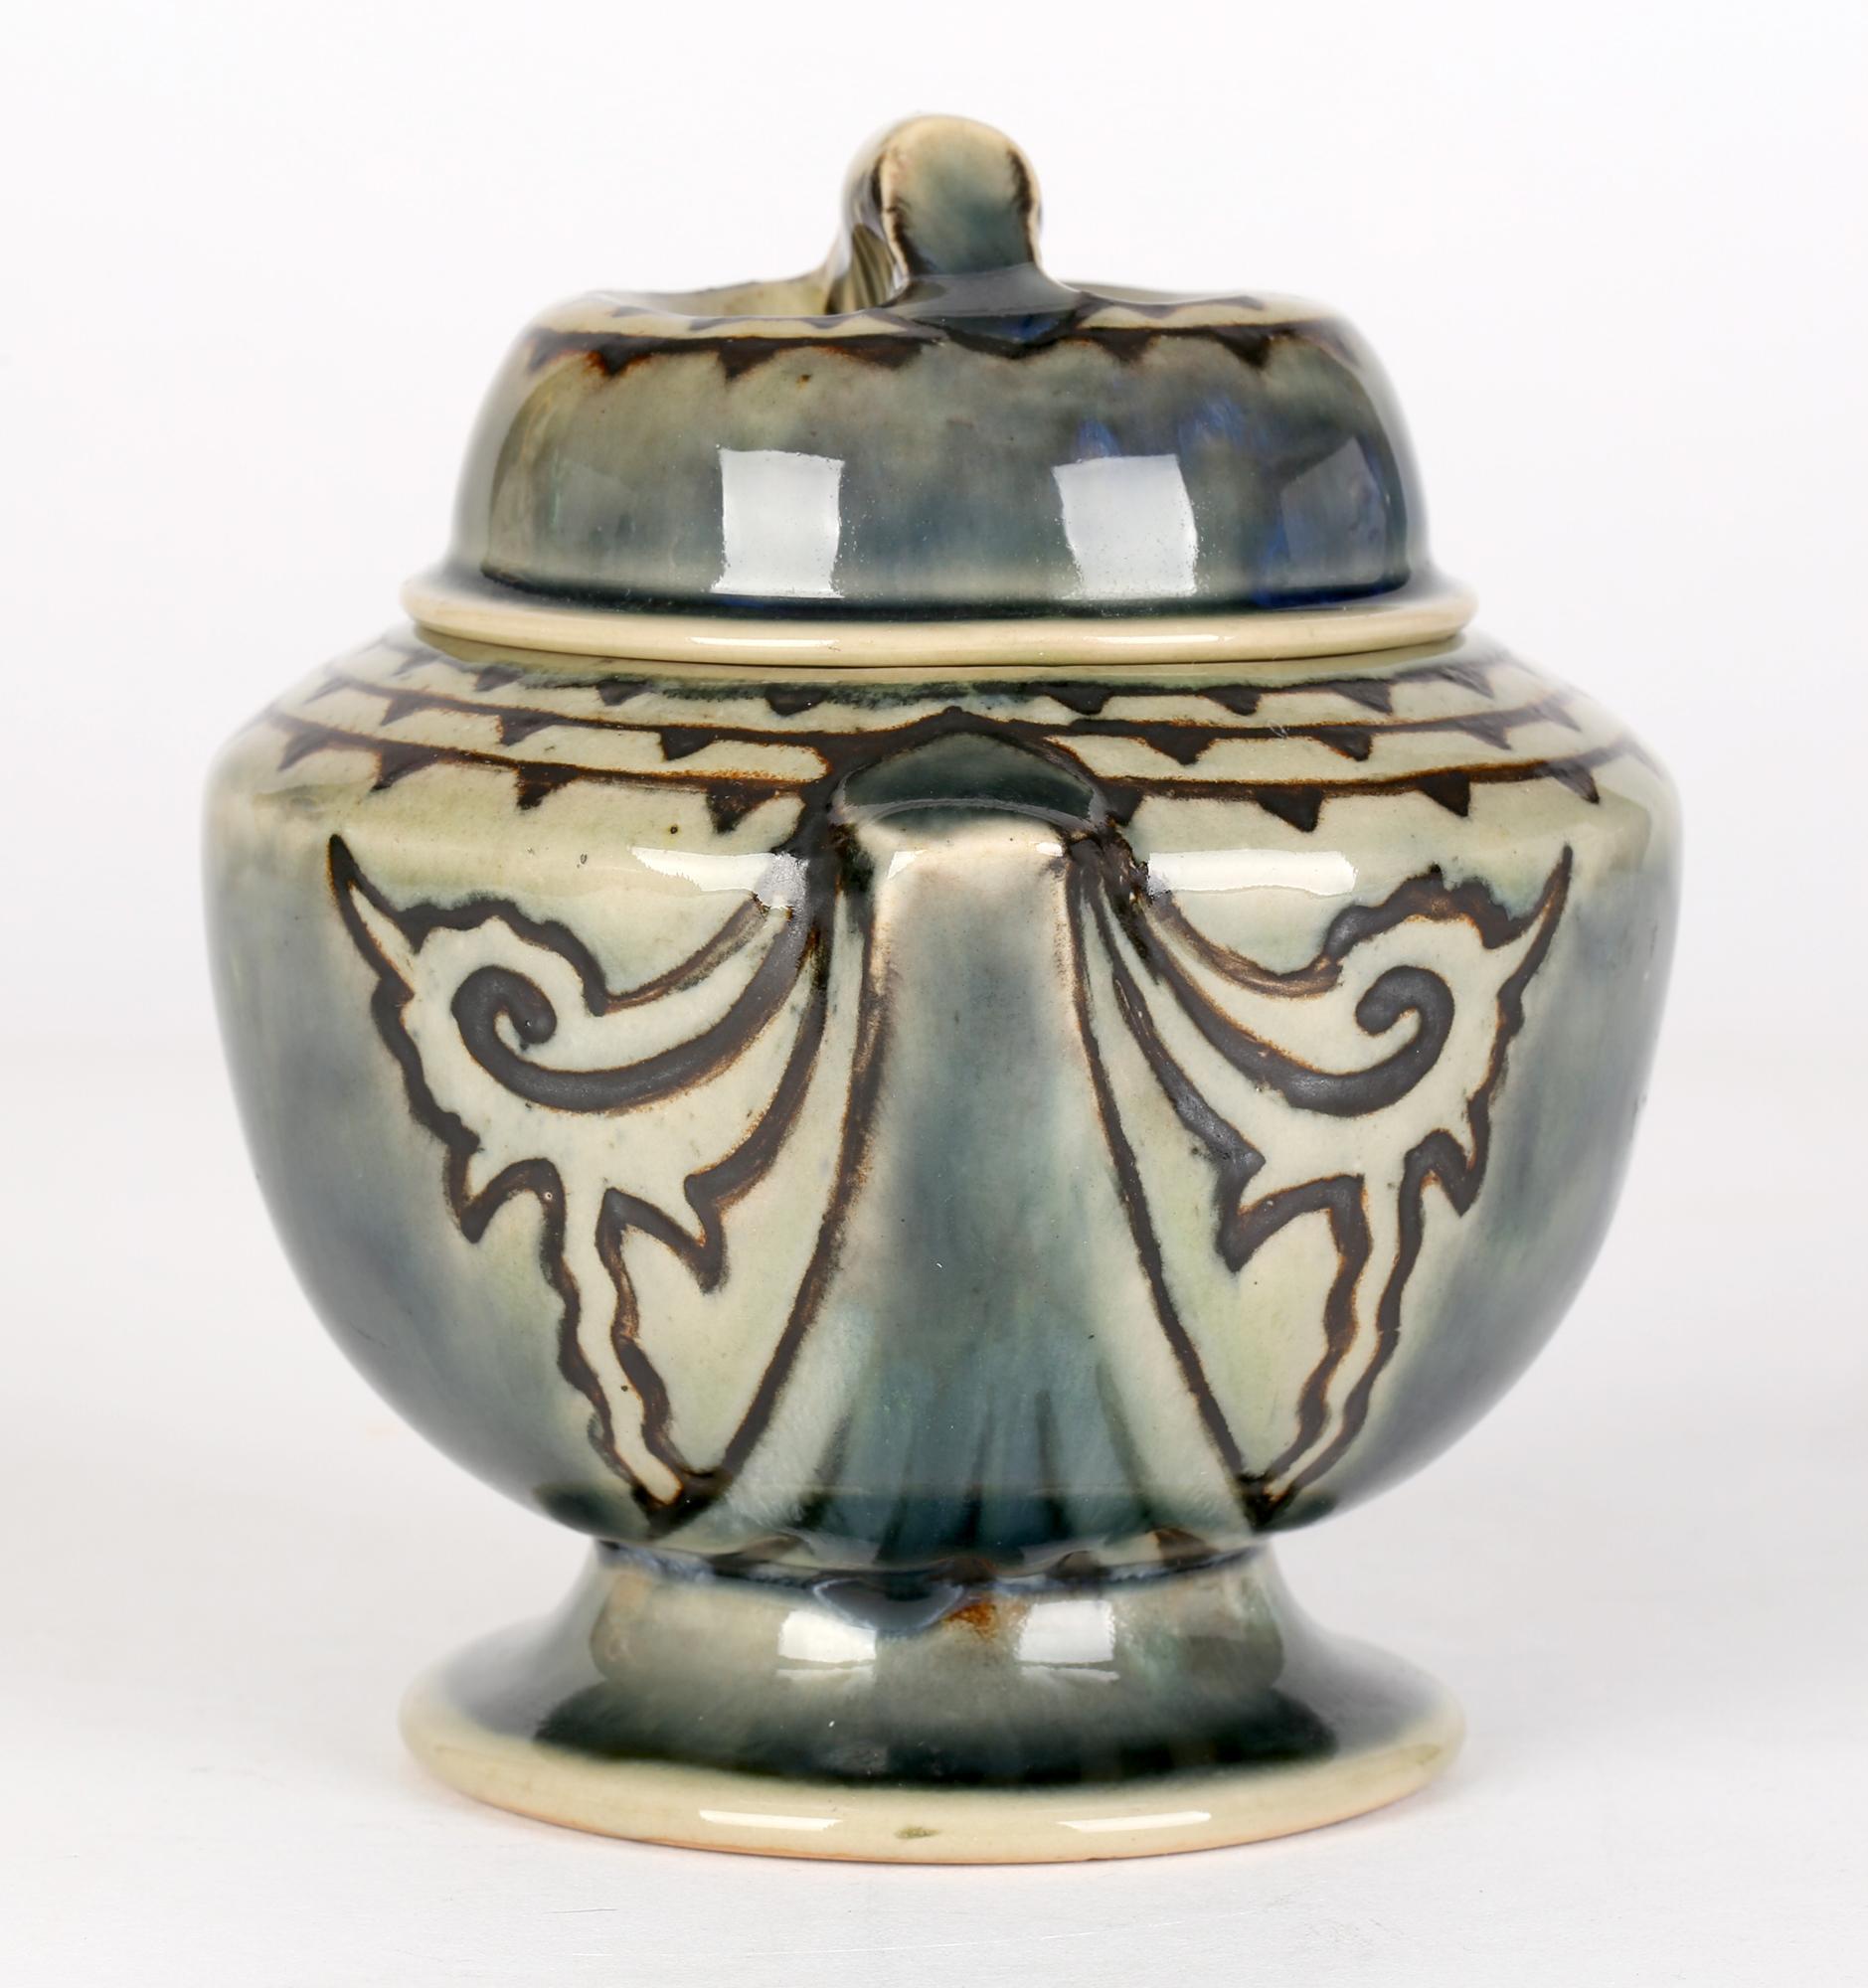 An unusual Doulton Lambeth Art Deco stoneware tobacco jar and cover decorated with patterned designs by Ethel Beard and Joan Honey and dated 1925. The jar has the feel of heavy porcelain with the round bodied jar raised on a pedestal foot with